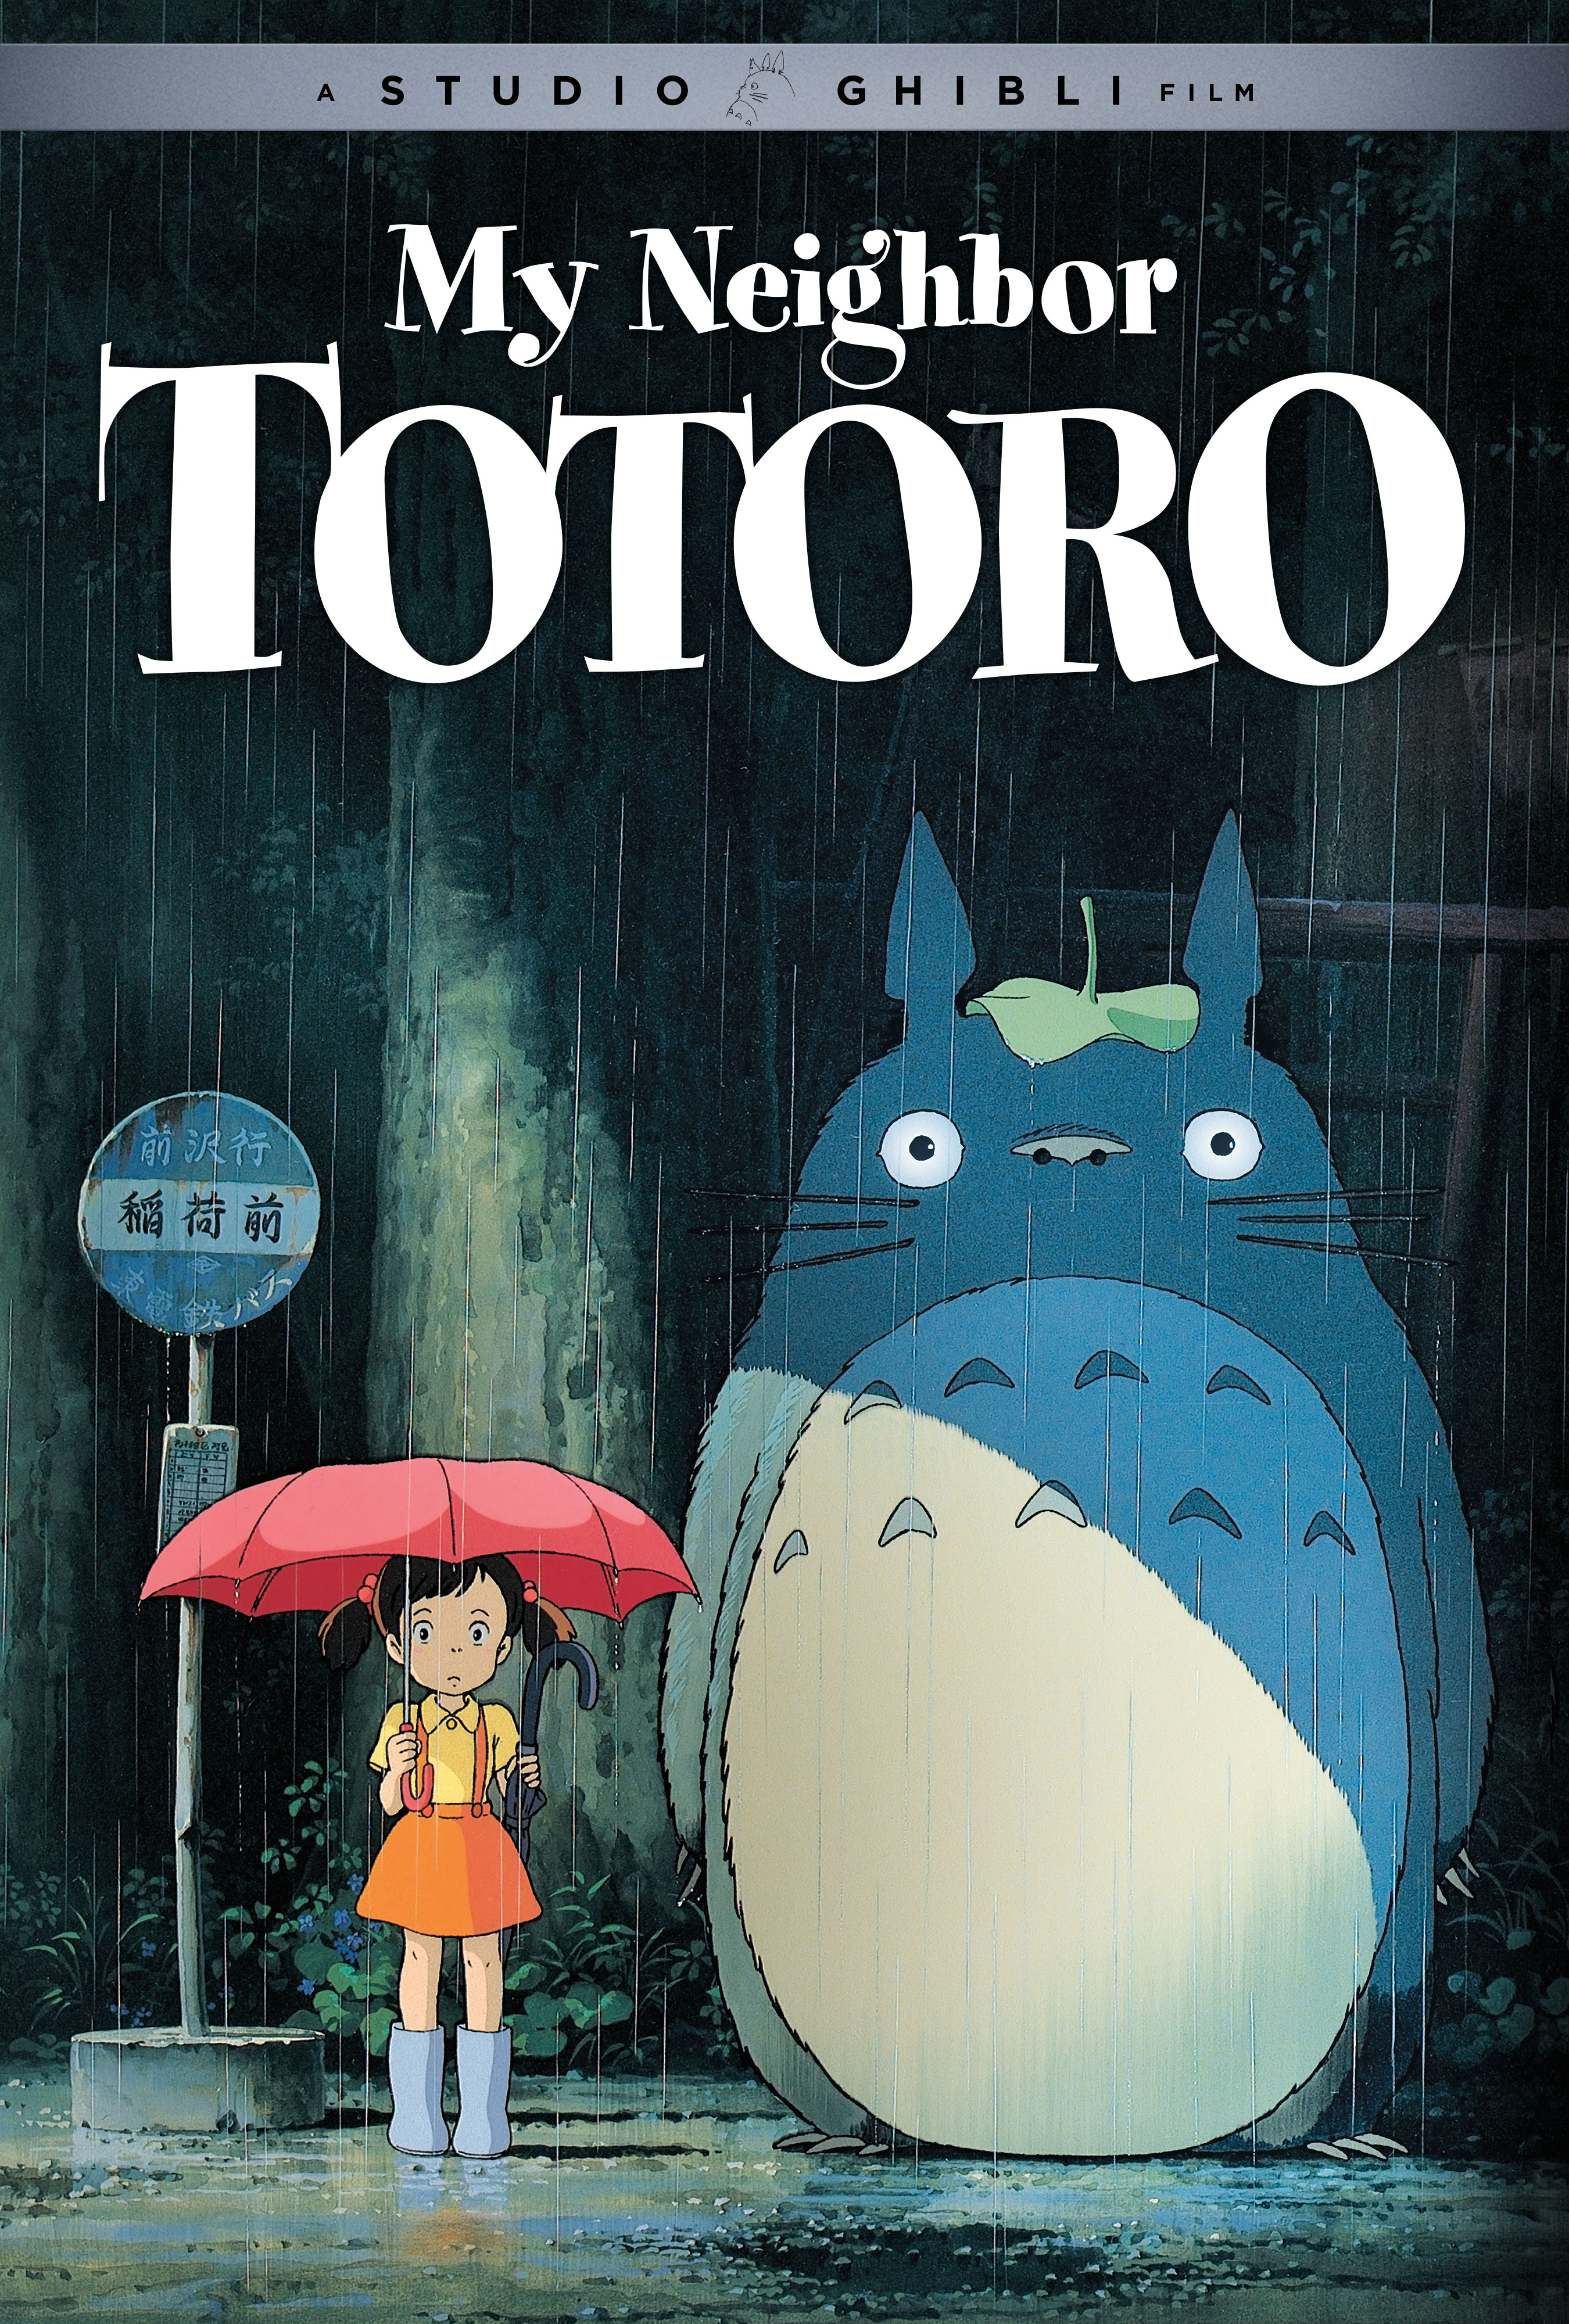 poster for My Neighbor Totoro, young girl waiting at bus stop with large mysterious cuddly furry creature